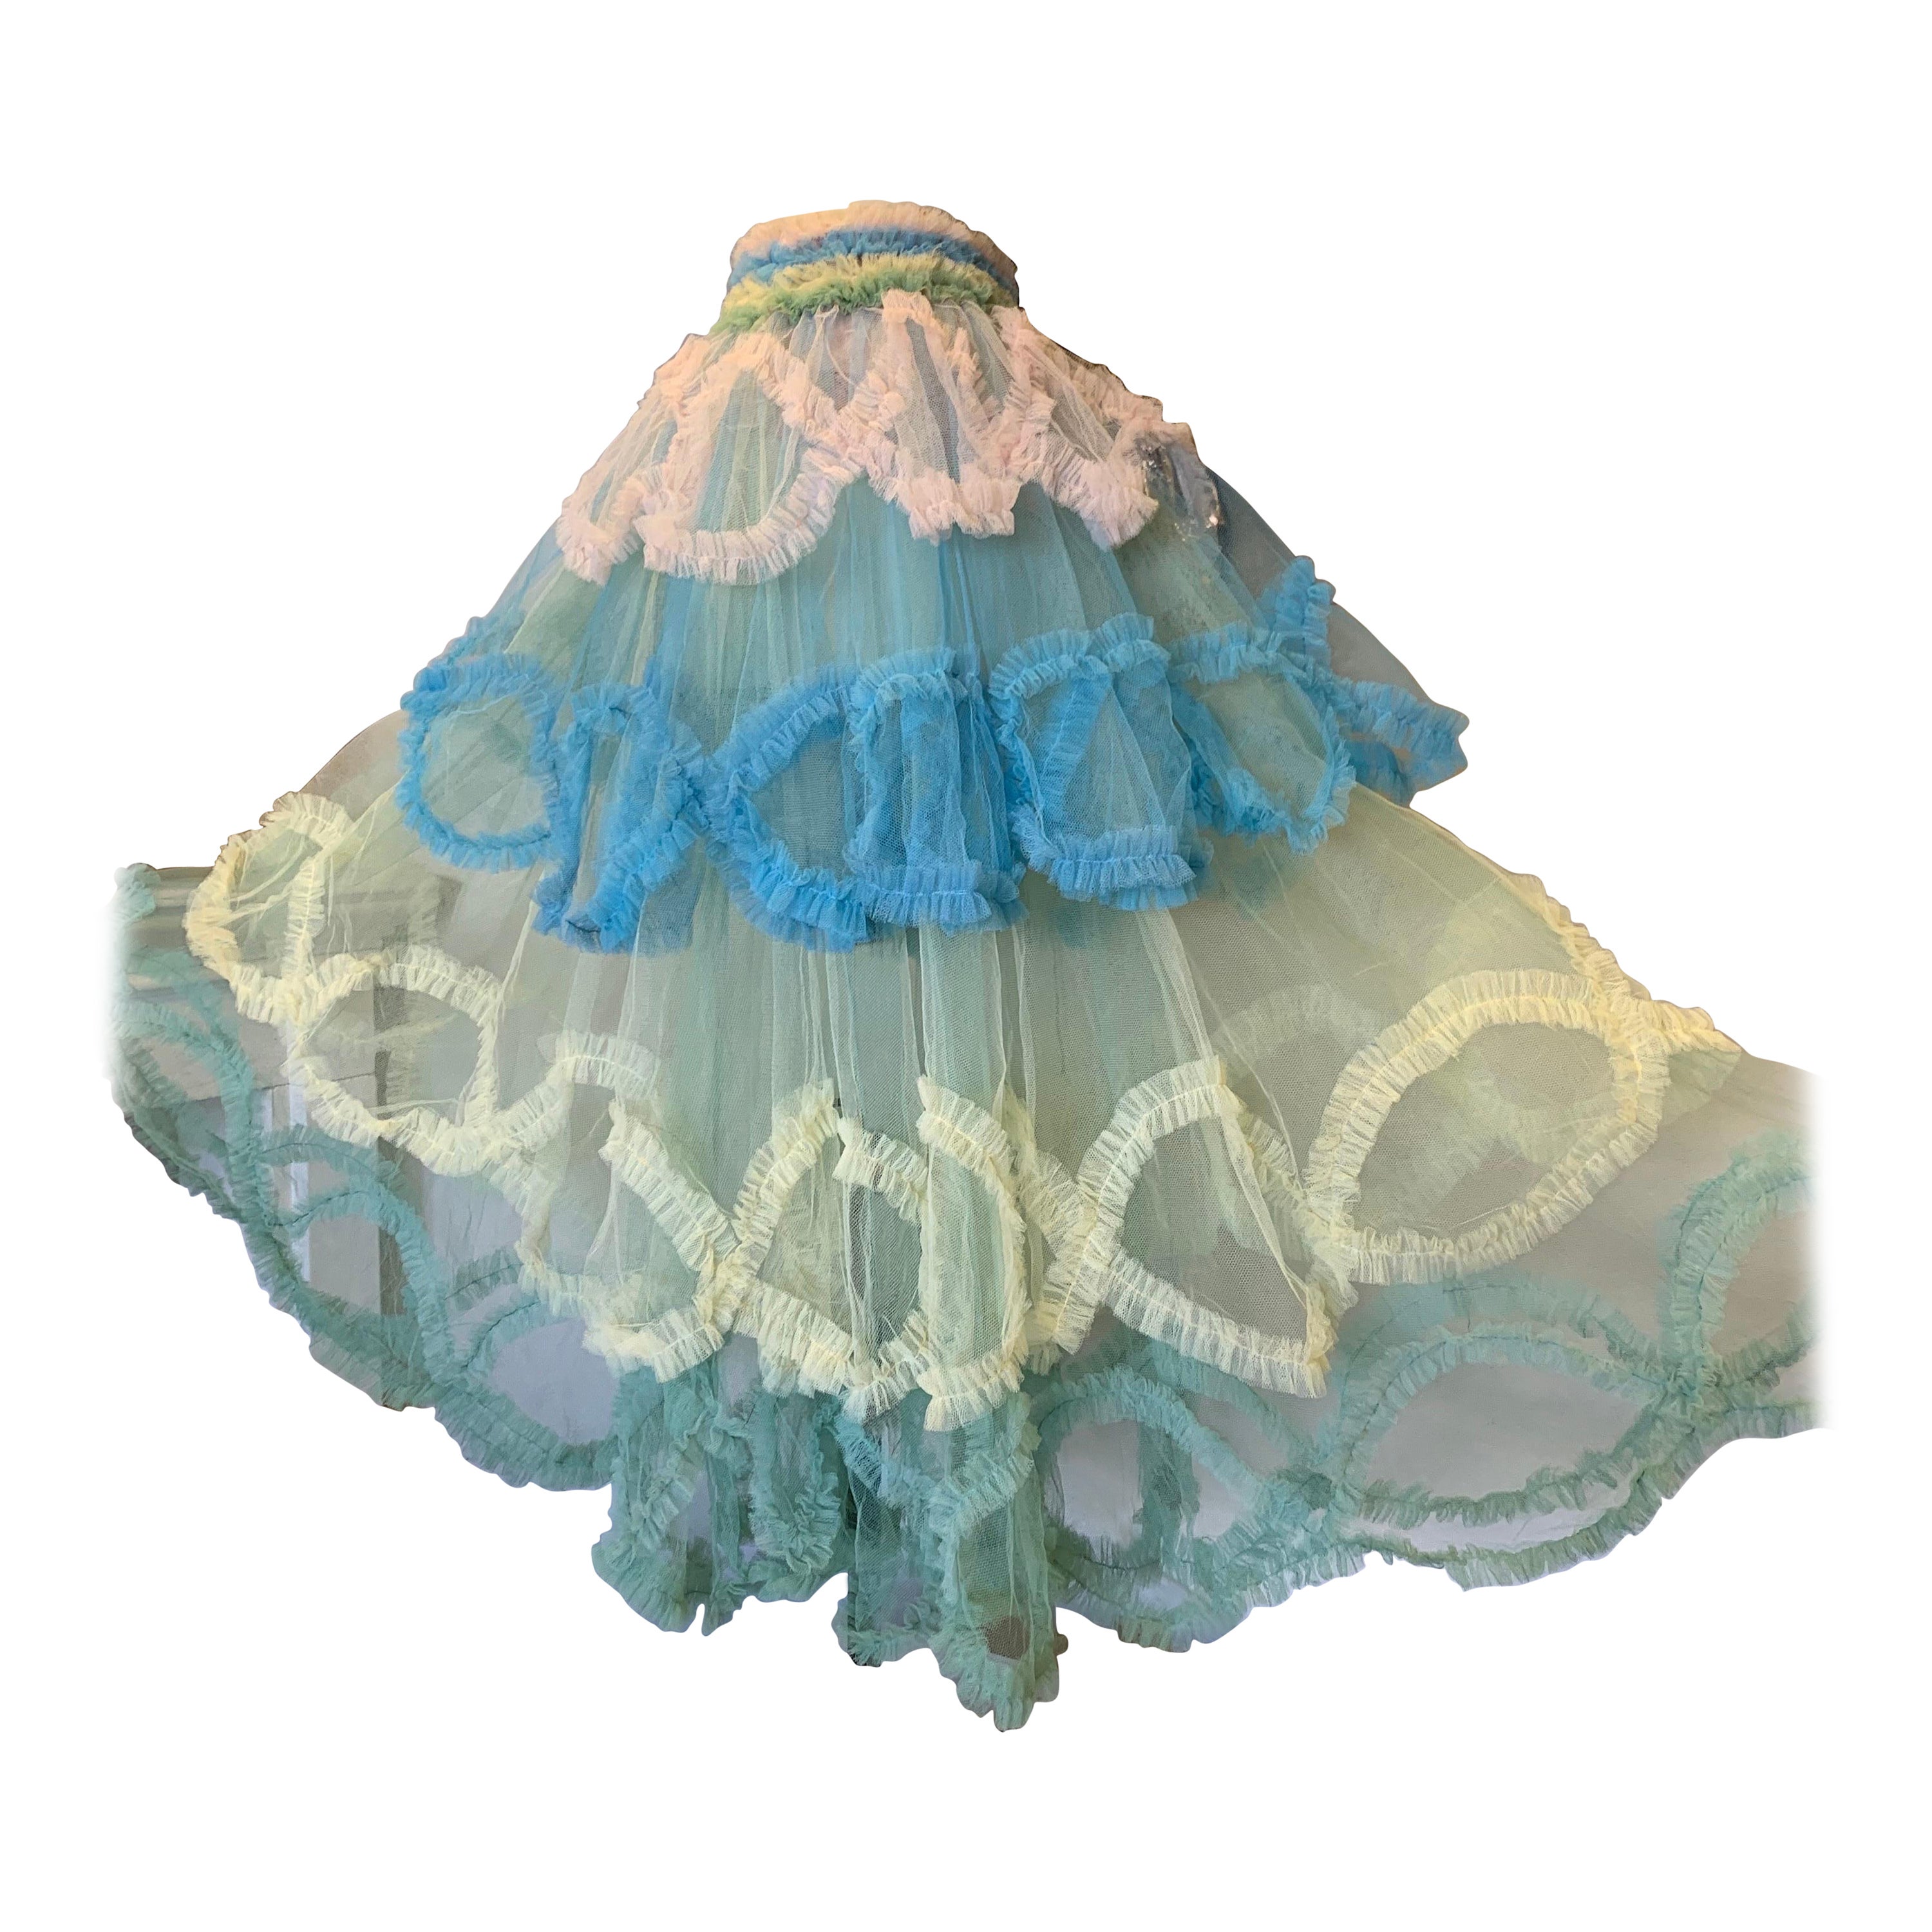 Torso Creations 1950s-Styled Tiered Tulle Ball Skirt w Colorful Ruffles  For Sale